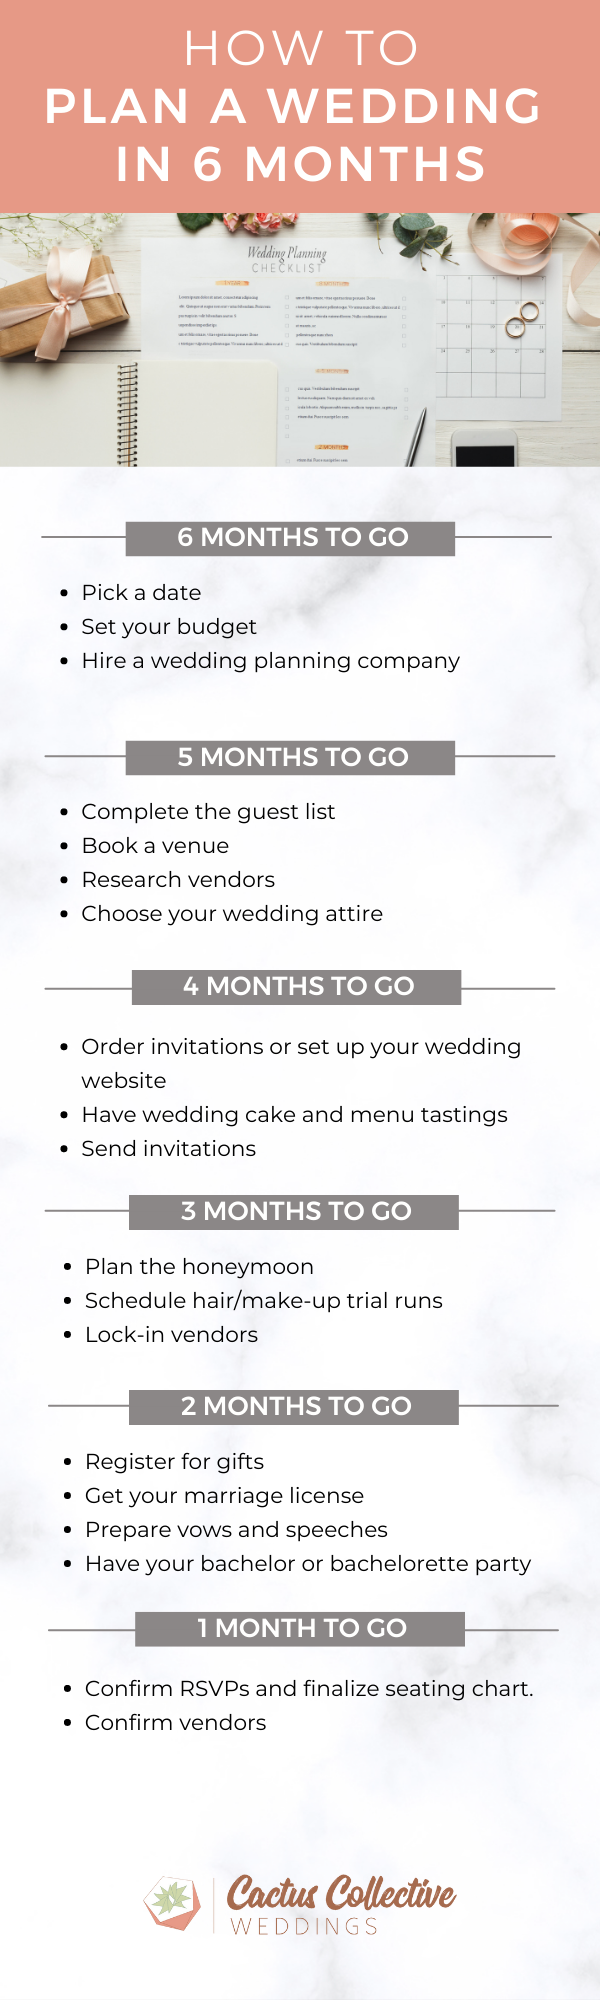 https://cactus-collective.com/wp-content/gallery/blog-post-how-to-plan-a-wedding-in-6-months/how-to-plan-wedding-6-months.png?i=2063114443